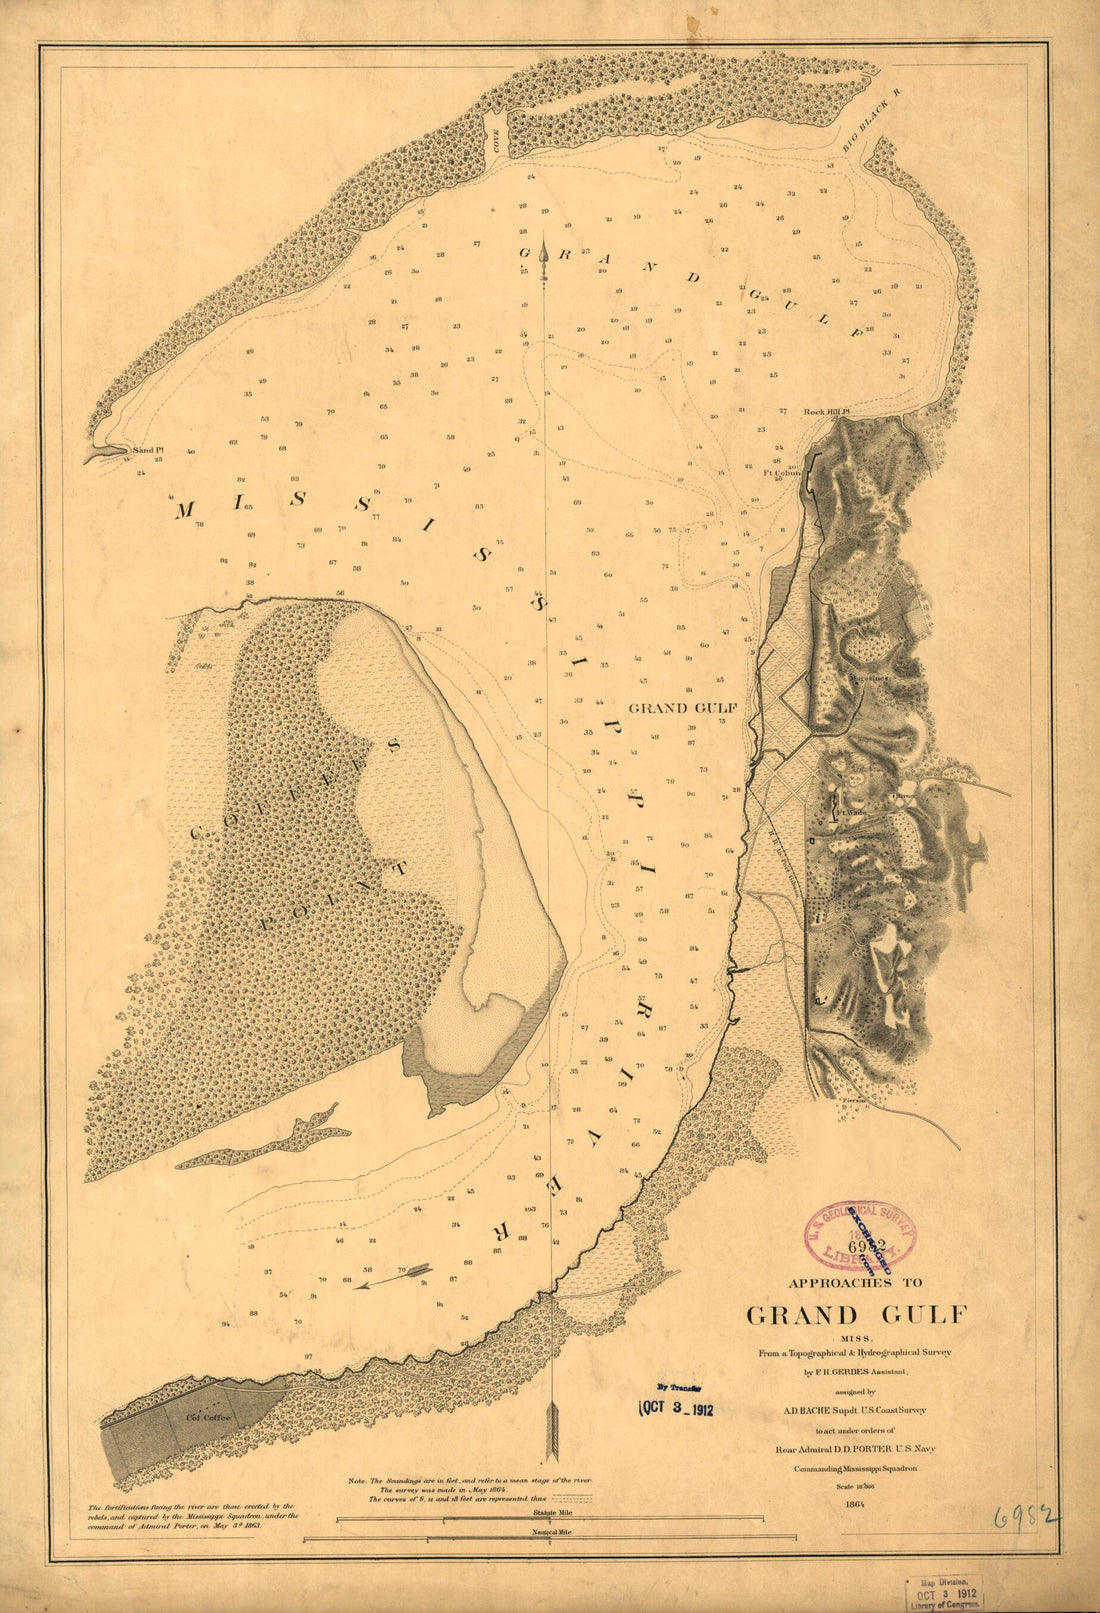 This old map of Approaches to Grand Gulf, Mississippi from 1864 was created by F. H. Gerdes in 1864